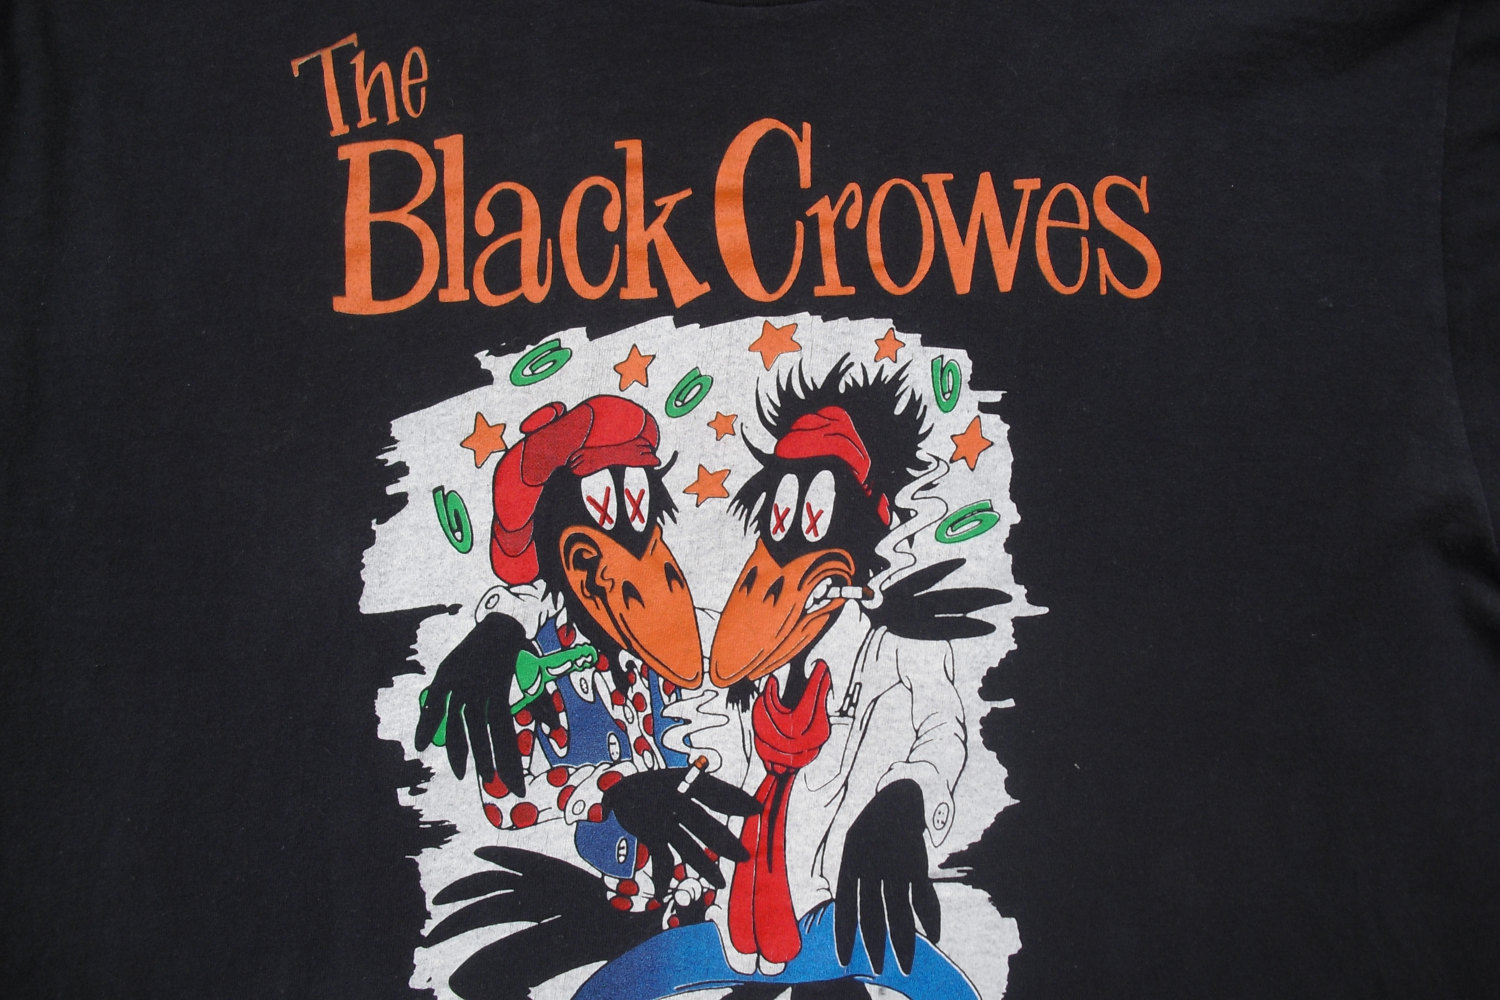 Black Crowes Archives In The Studio With Redbeard Upload, share, search and download for free. black crowes archives in the studio